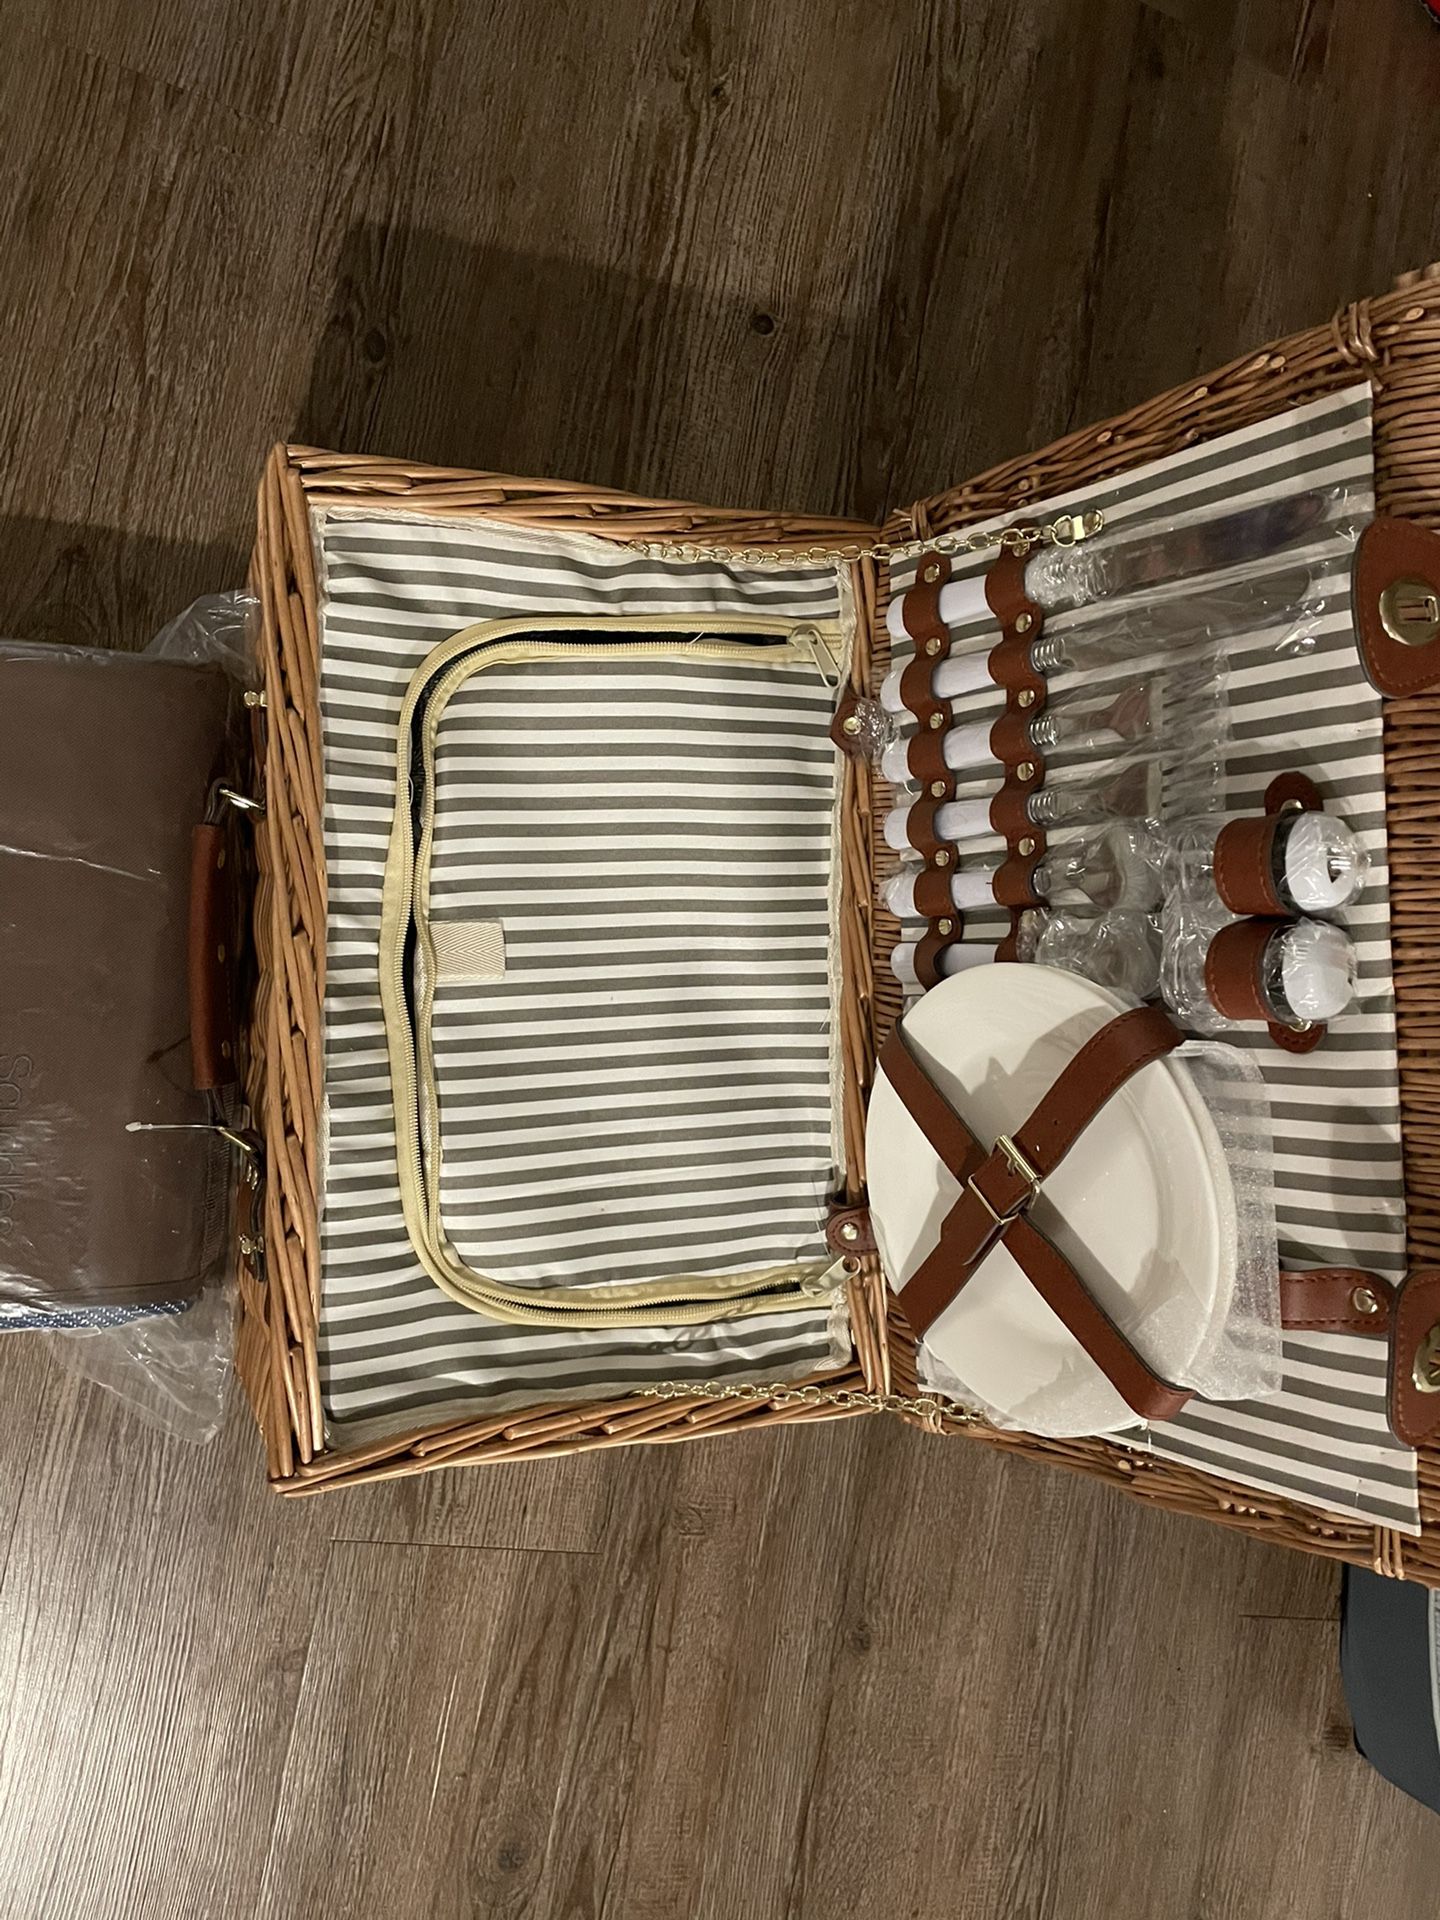 Picnic Basket And Outdoor Blanket